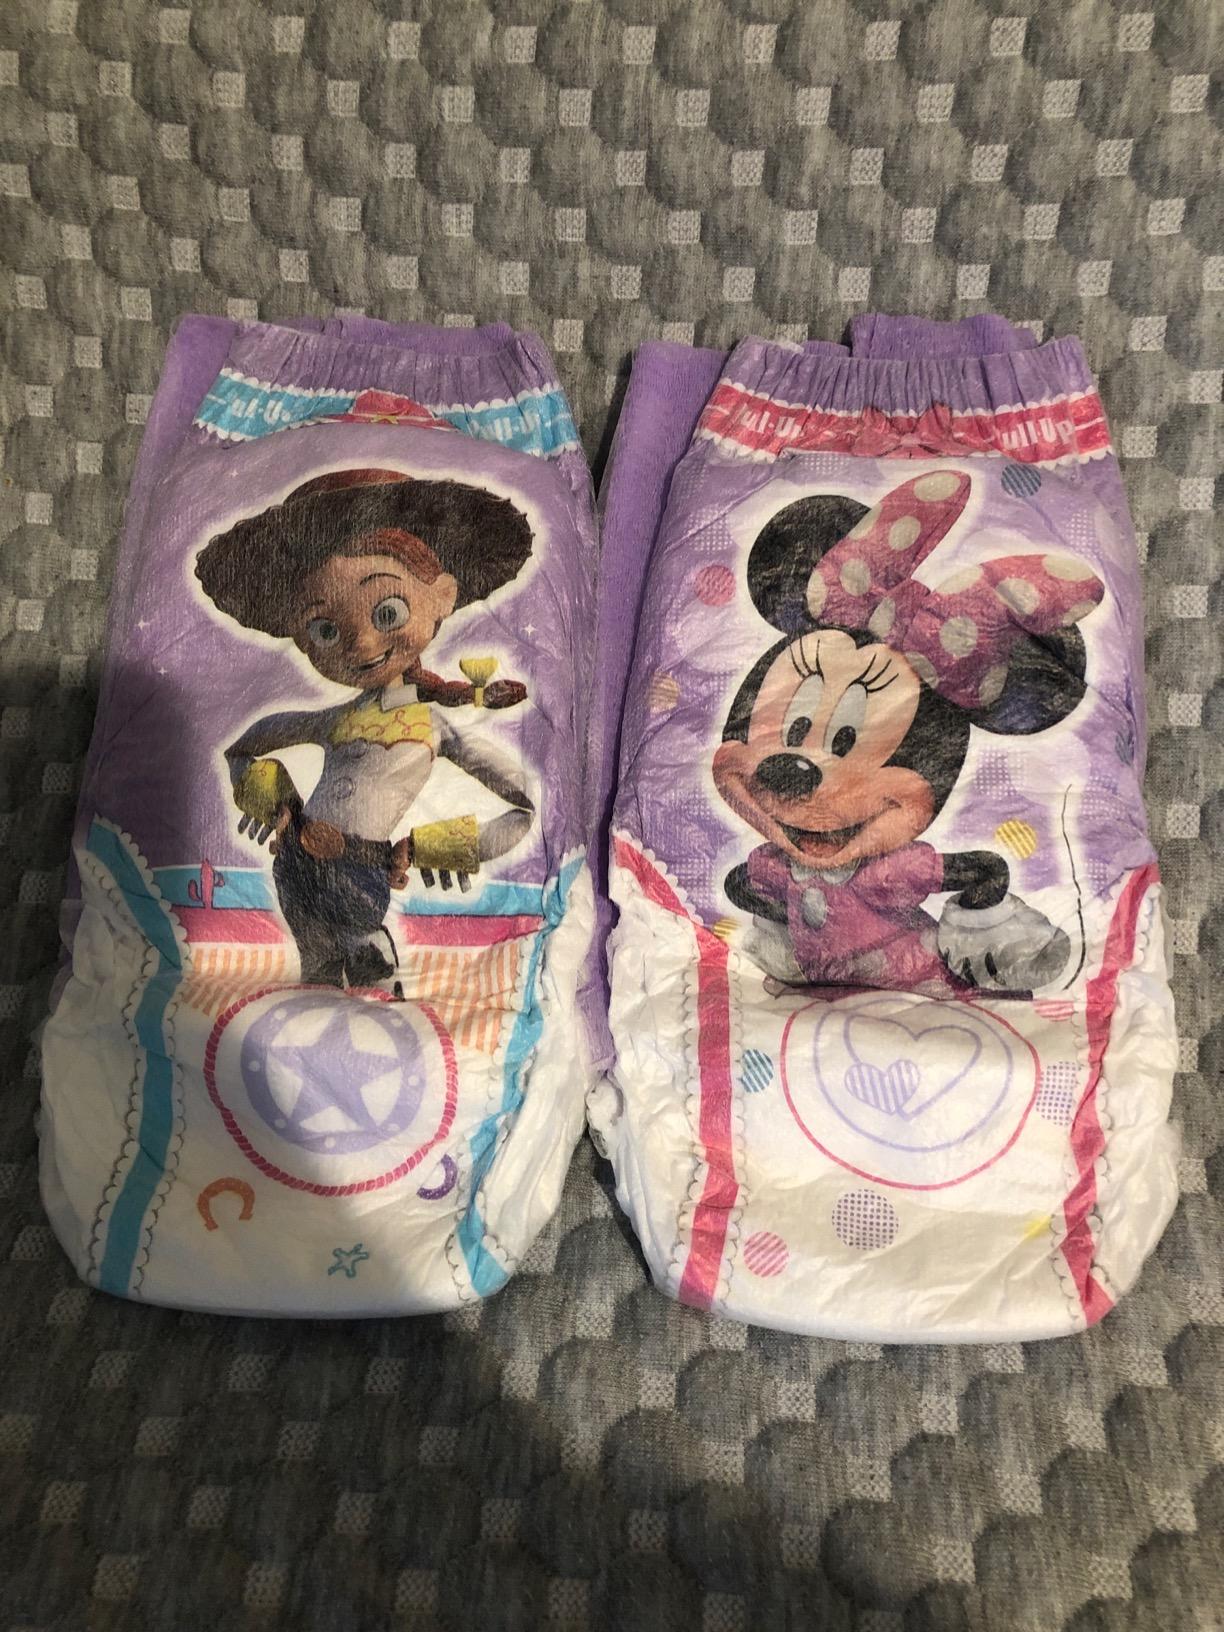 Jessie and Minnie Mouse Training Pants by Jack1set2 on DeviantArt